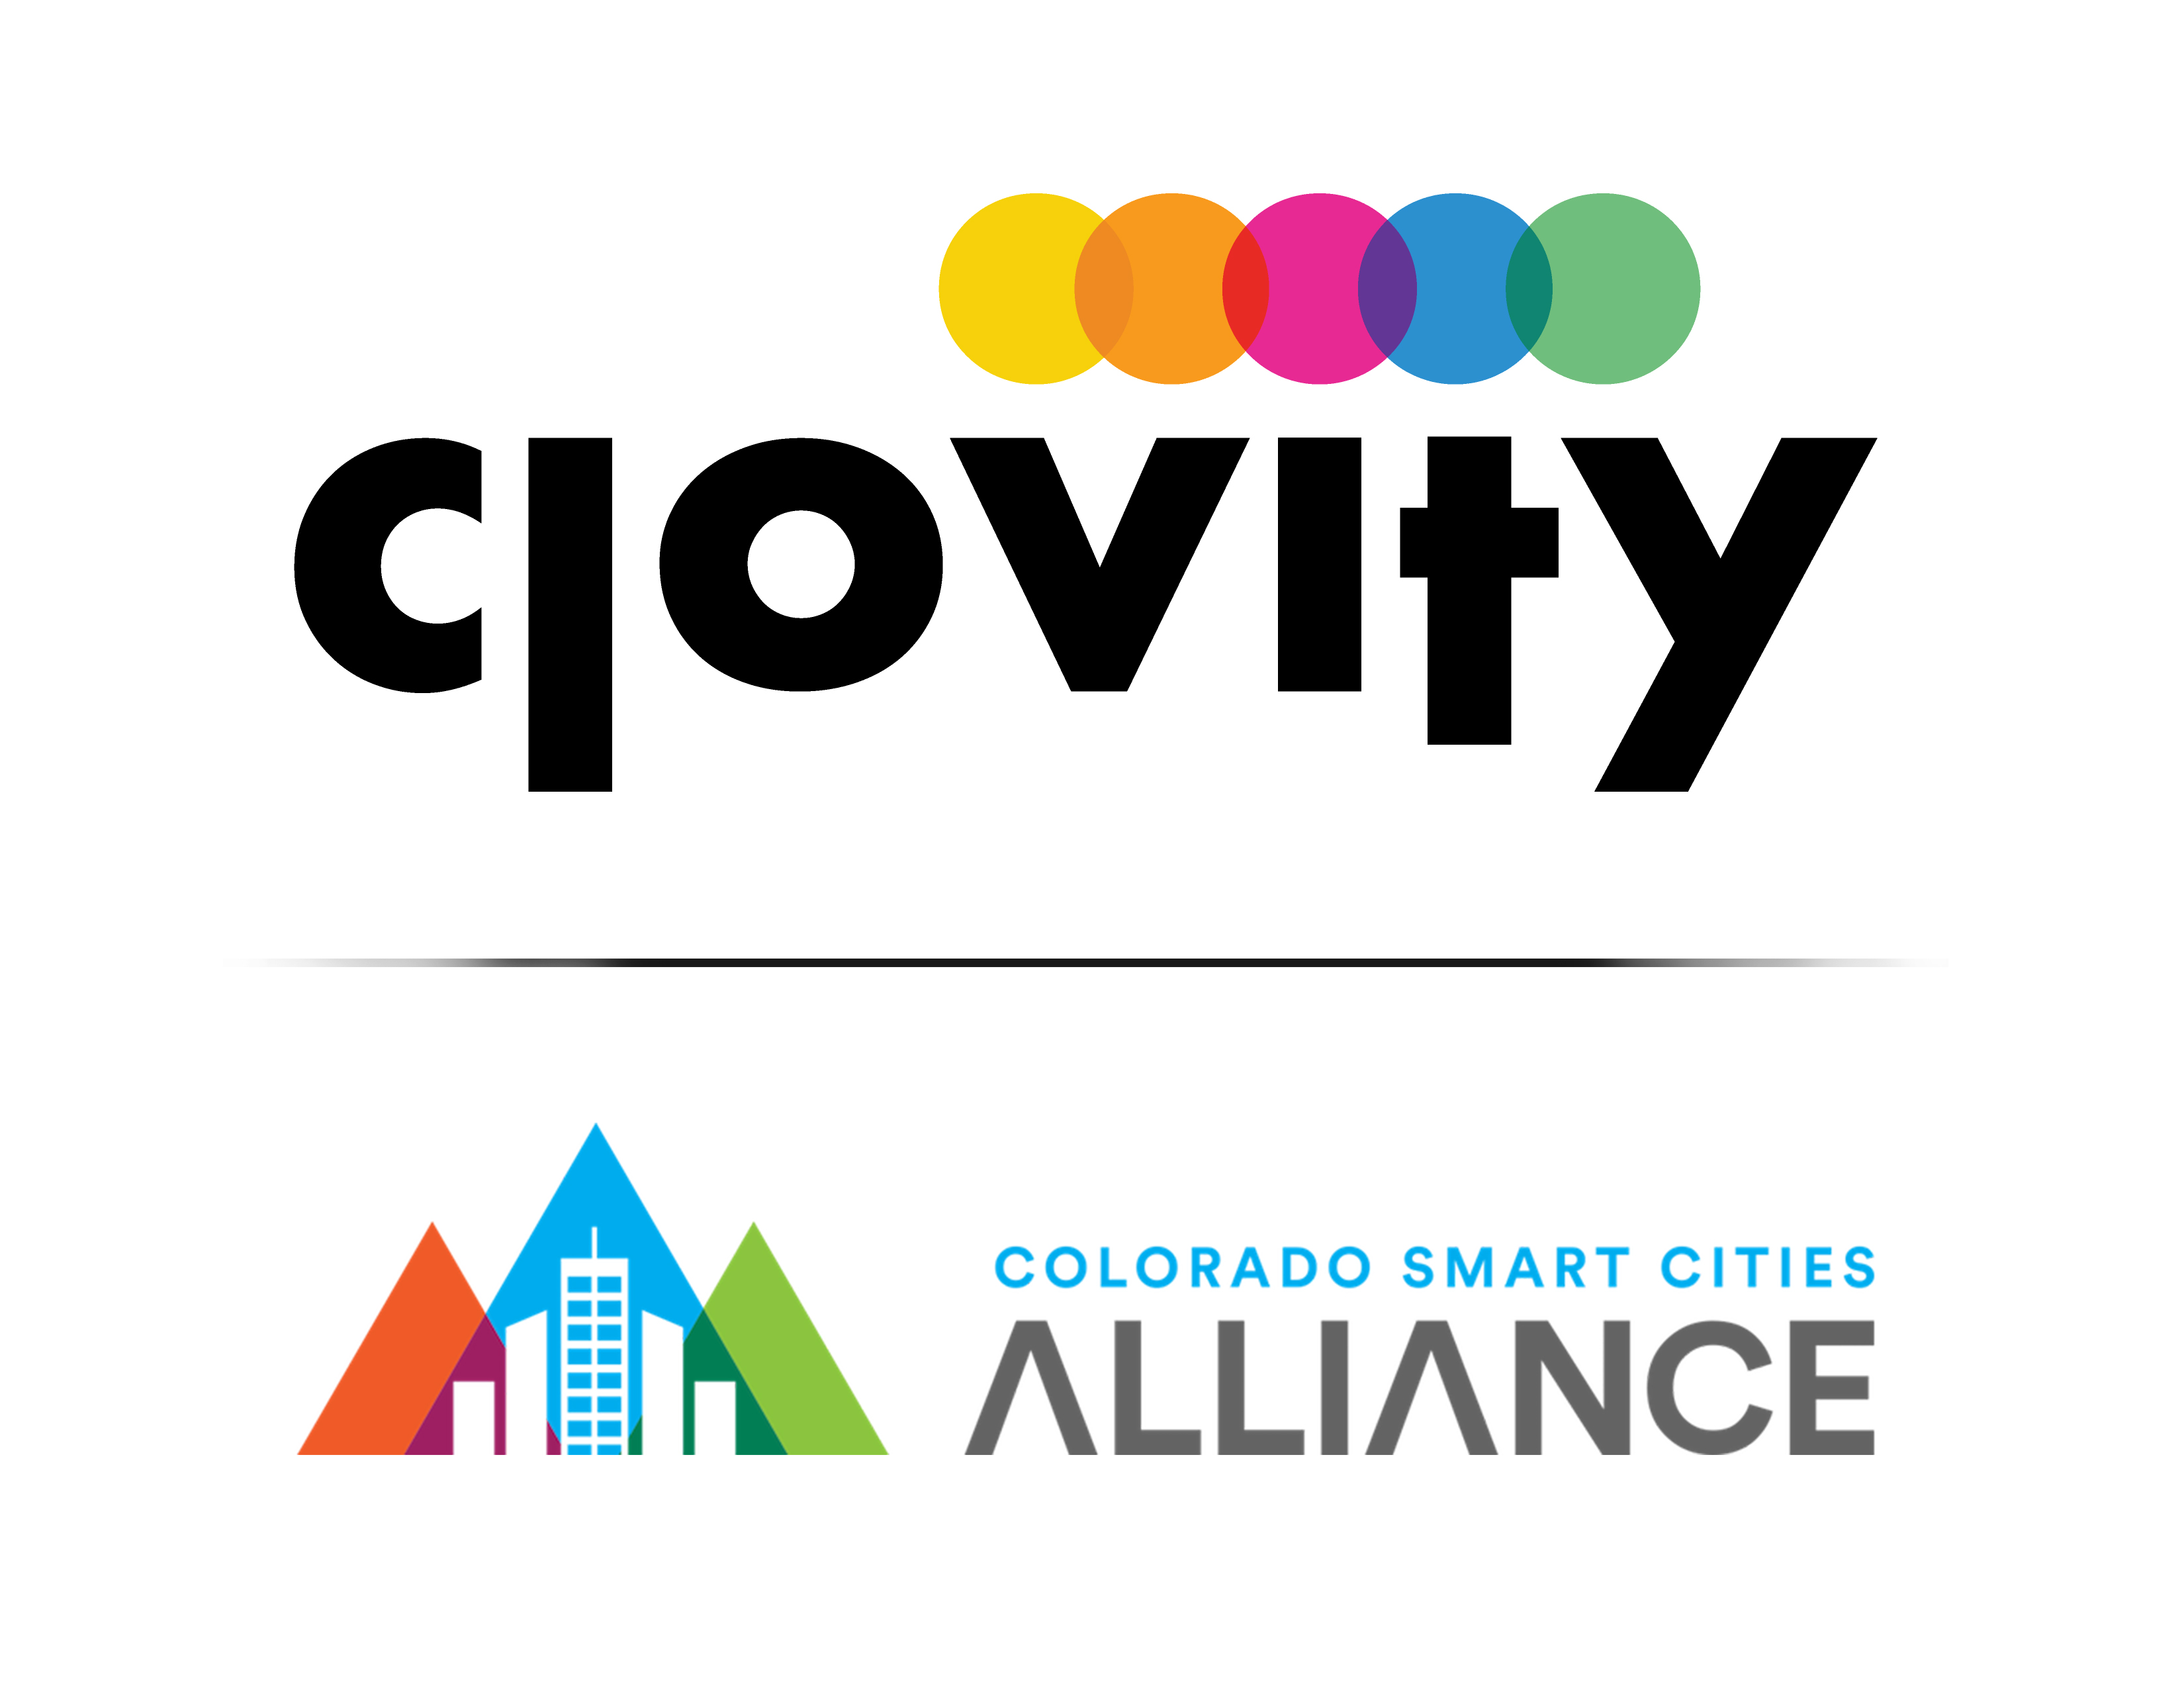 Clovity Joins the Colorado Smart Cities Alliance to provide its IoT Platform CSensorNet for Colorado Cities Looking to Go “Smart”